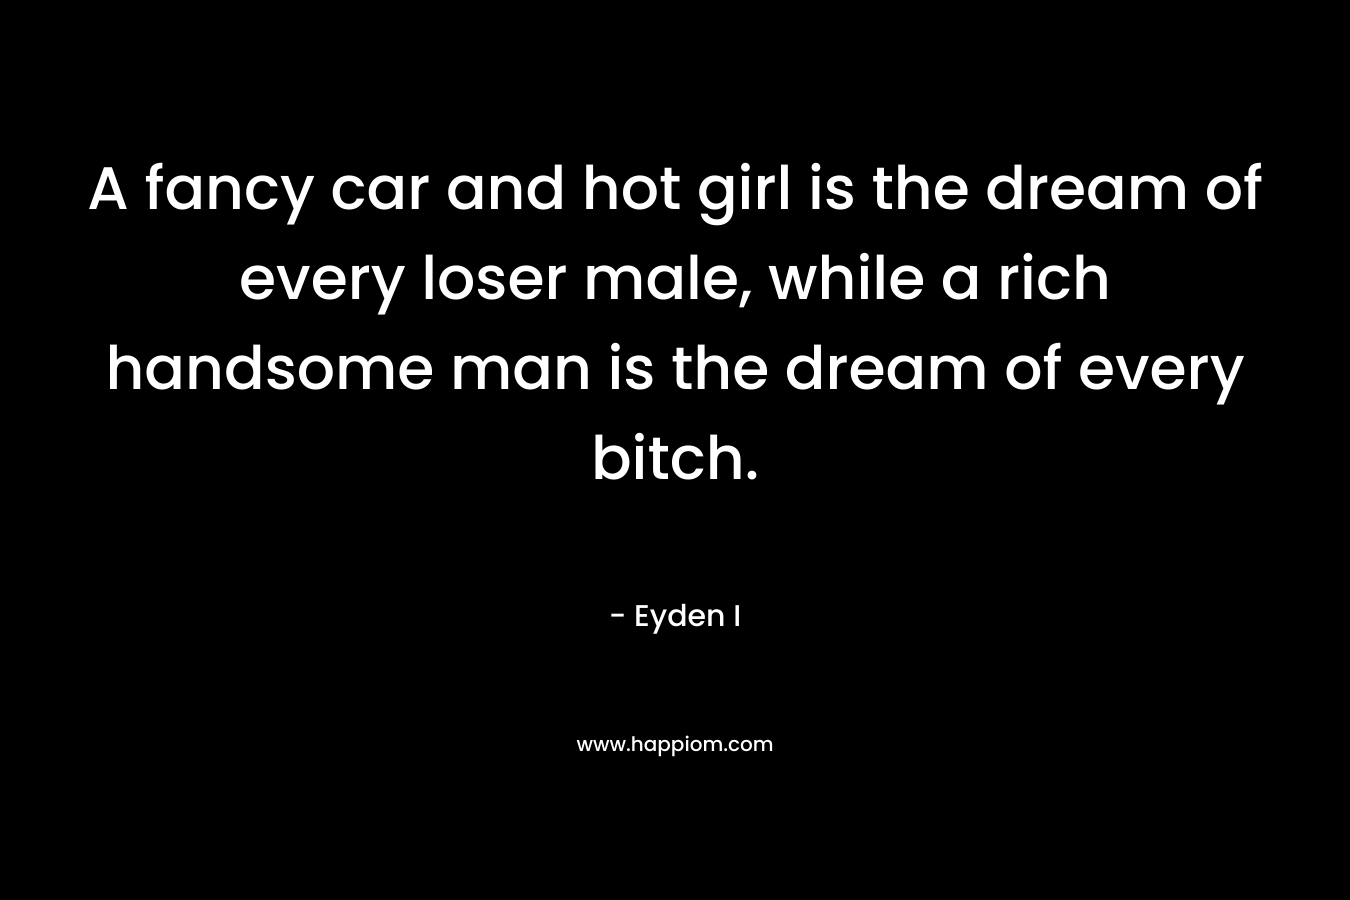 A fancy car and hot girl is the dream of every loser male, while a rich handsome man is the dream of every bitch.